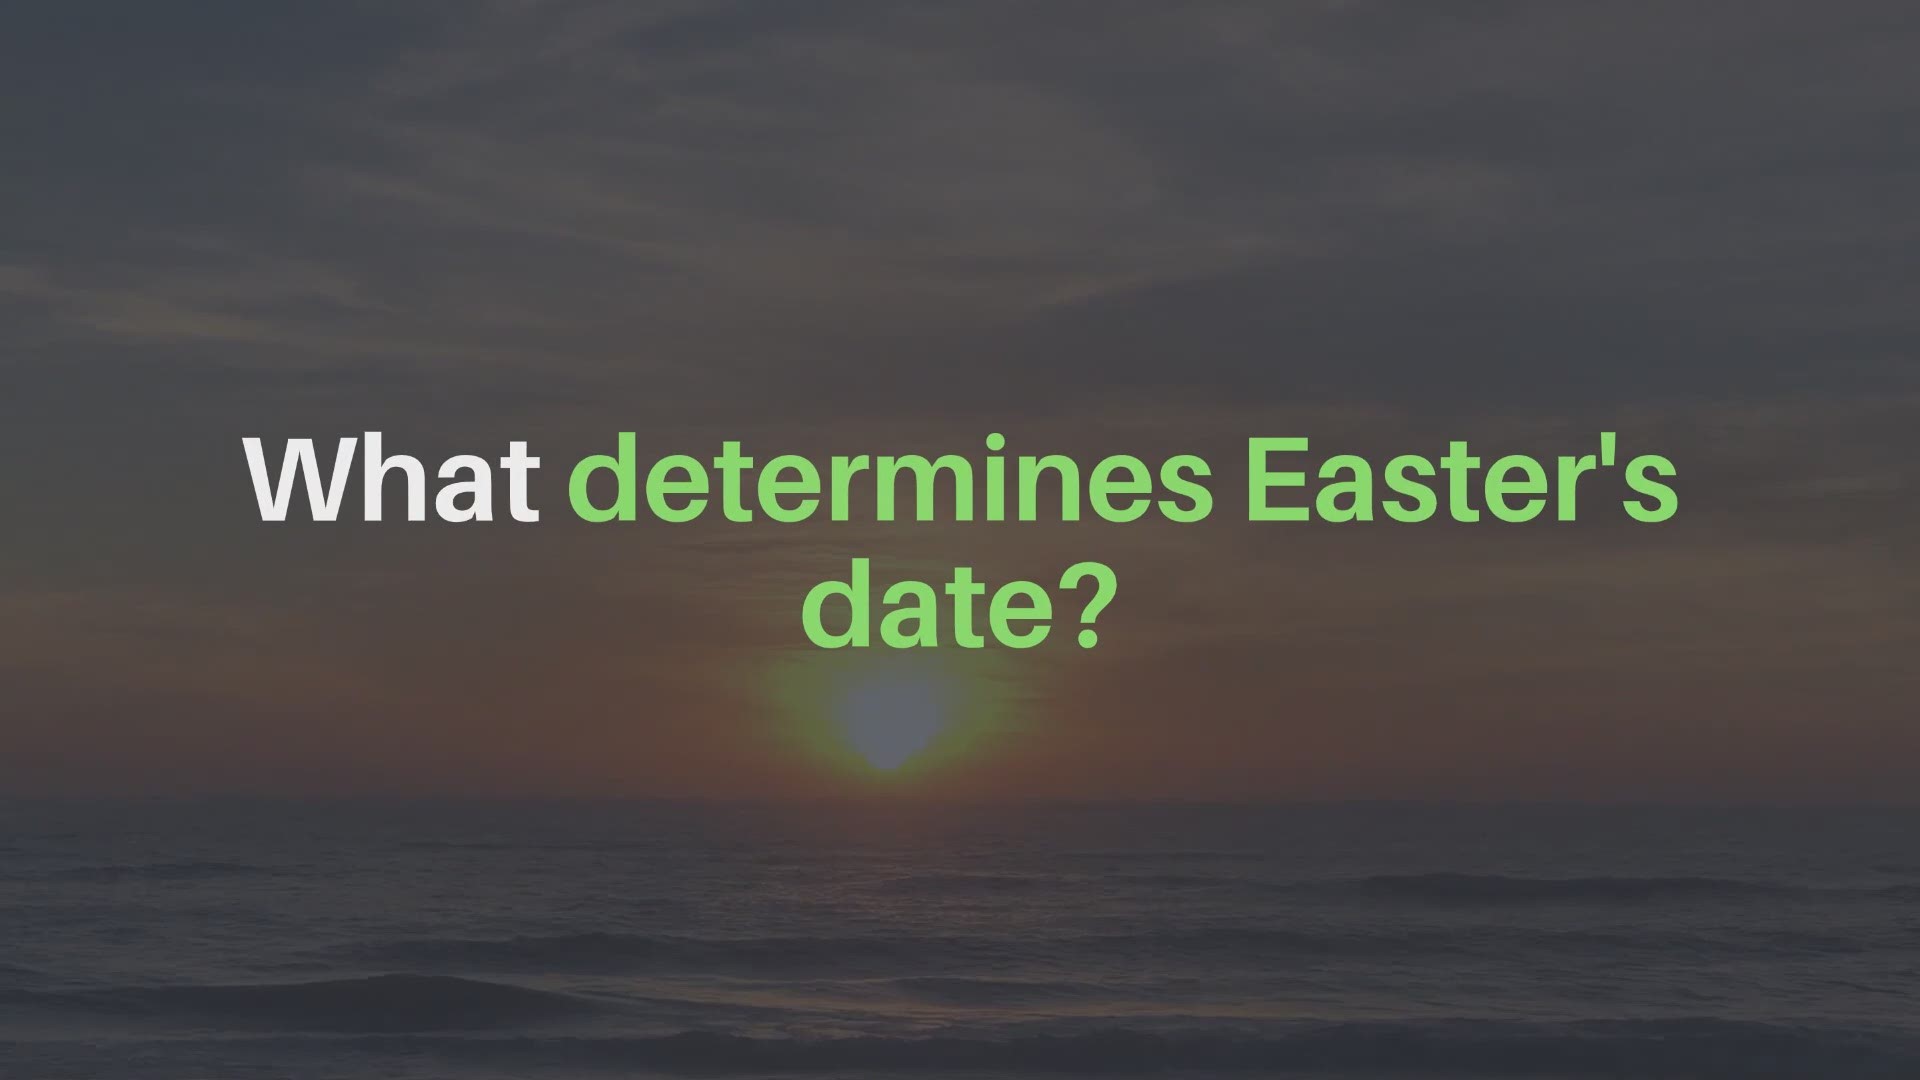 How is Easter's date determined each year?